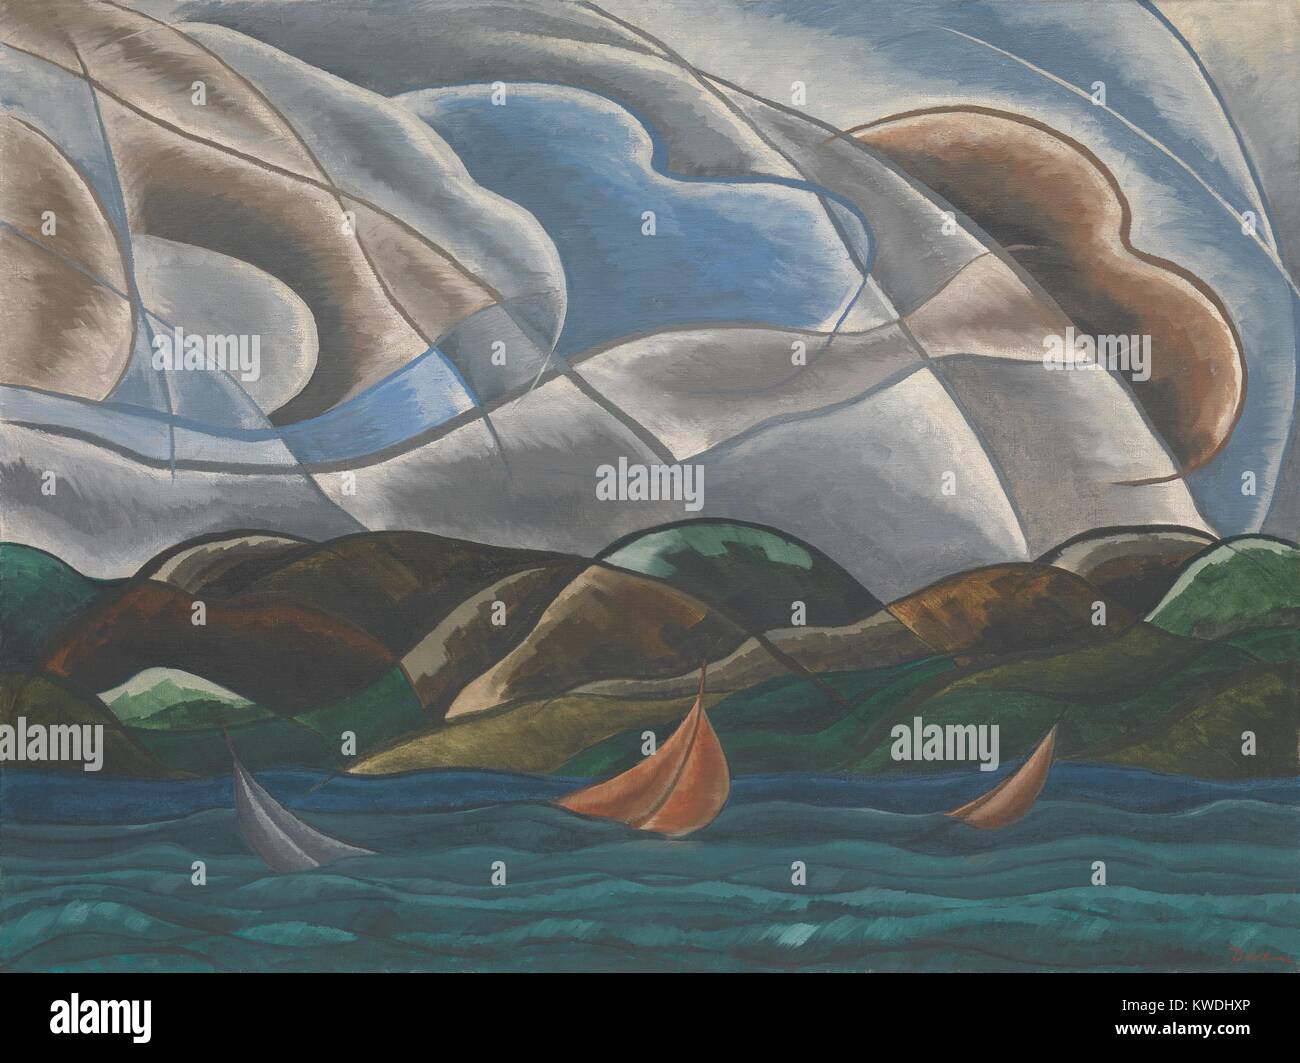 CLOUDS AND WATER, by Arthur Dove, 1930, American painting, Oil on canvas, with selective varnish. Abstract landscape of Halesite, Long Island, with sailboats on the choppy water. The wind is represented by bands of curved lines in the clouded sky (BSLOC 2017 7 83) Stock Photo